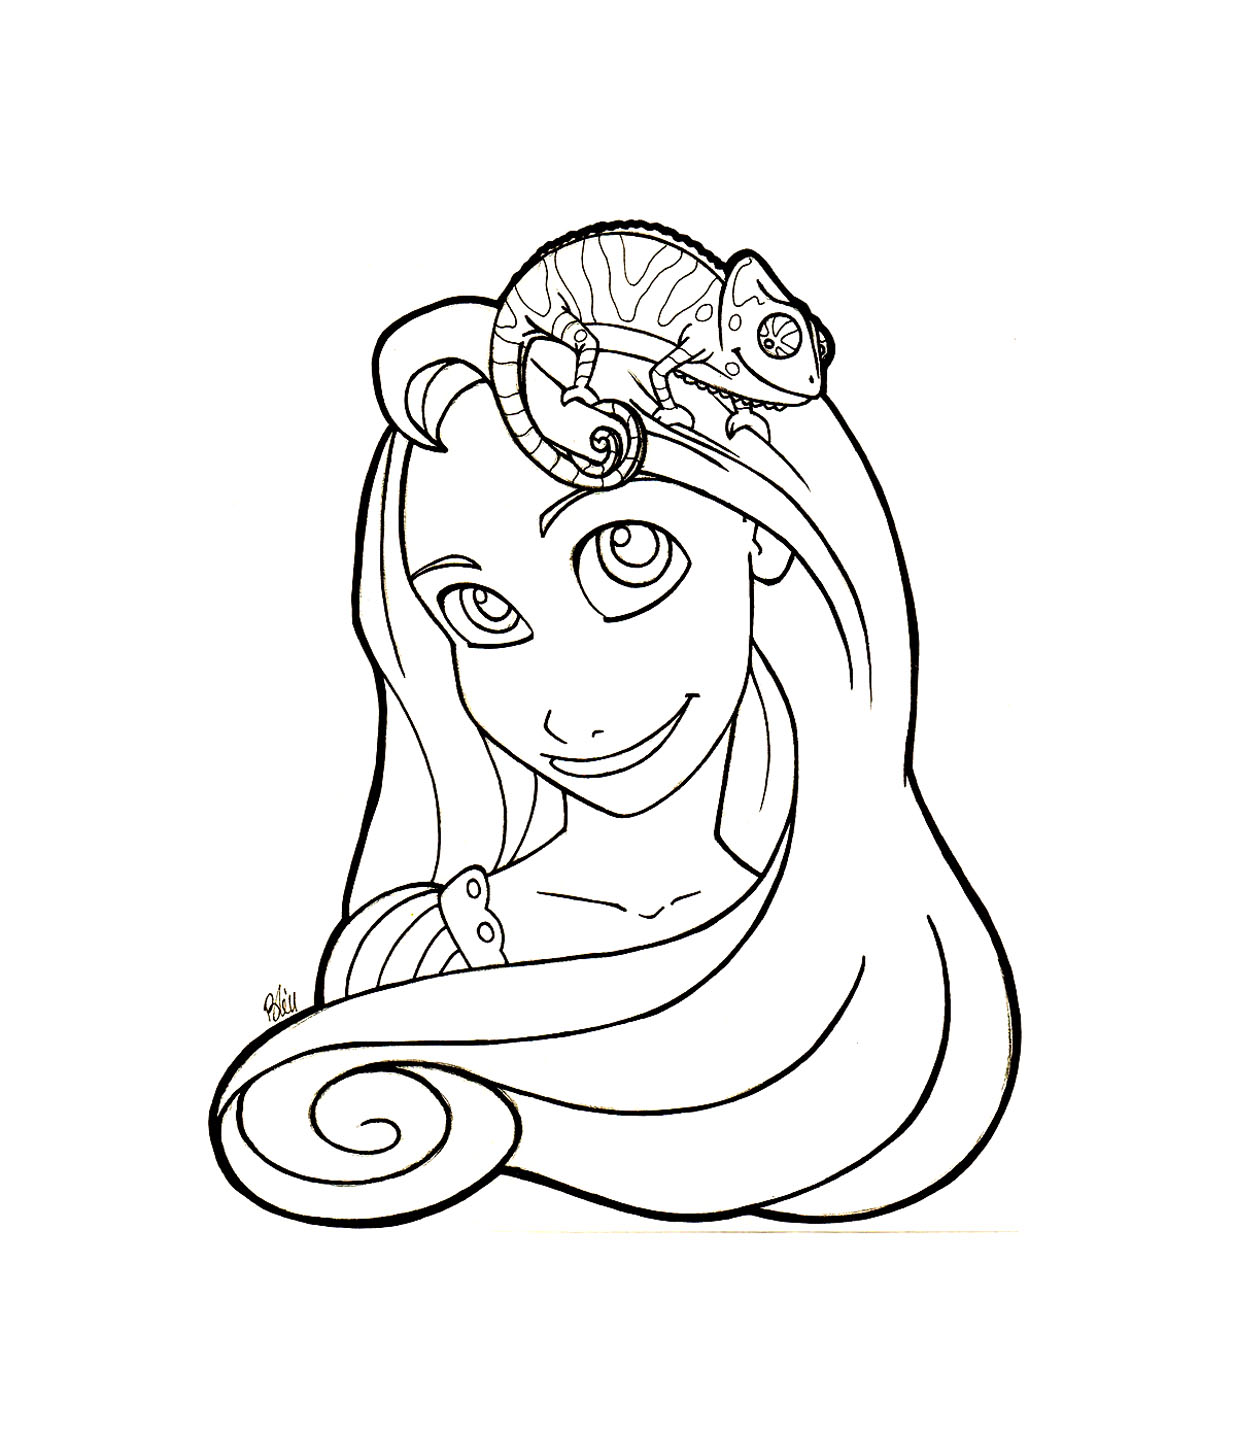 Tangled coloring page to print and color : Rapunzel portrait